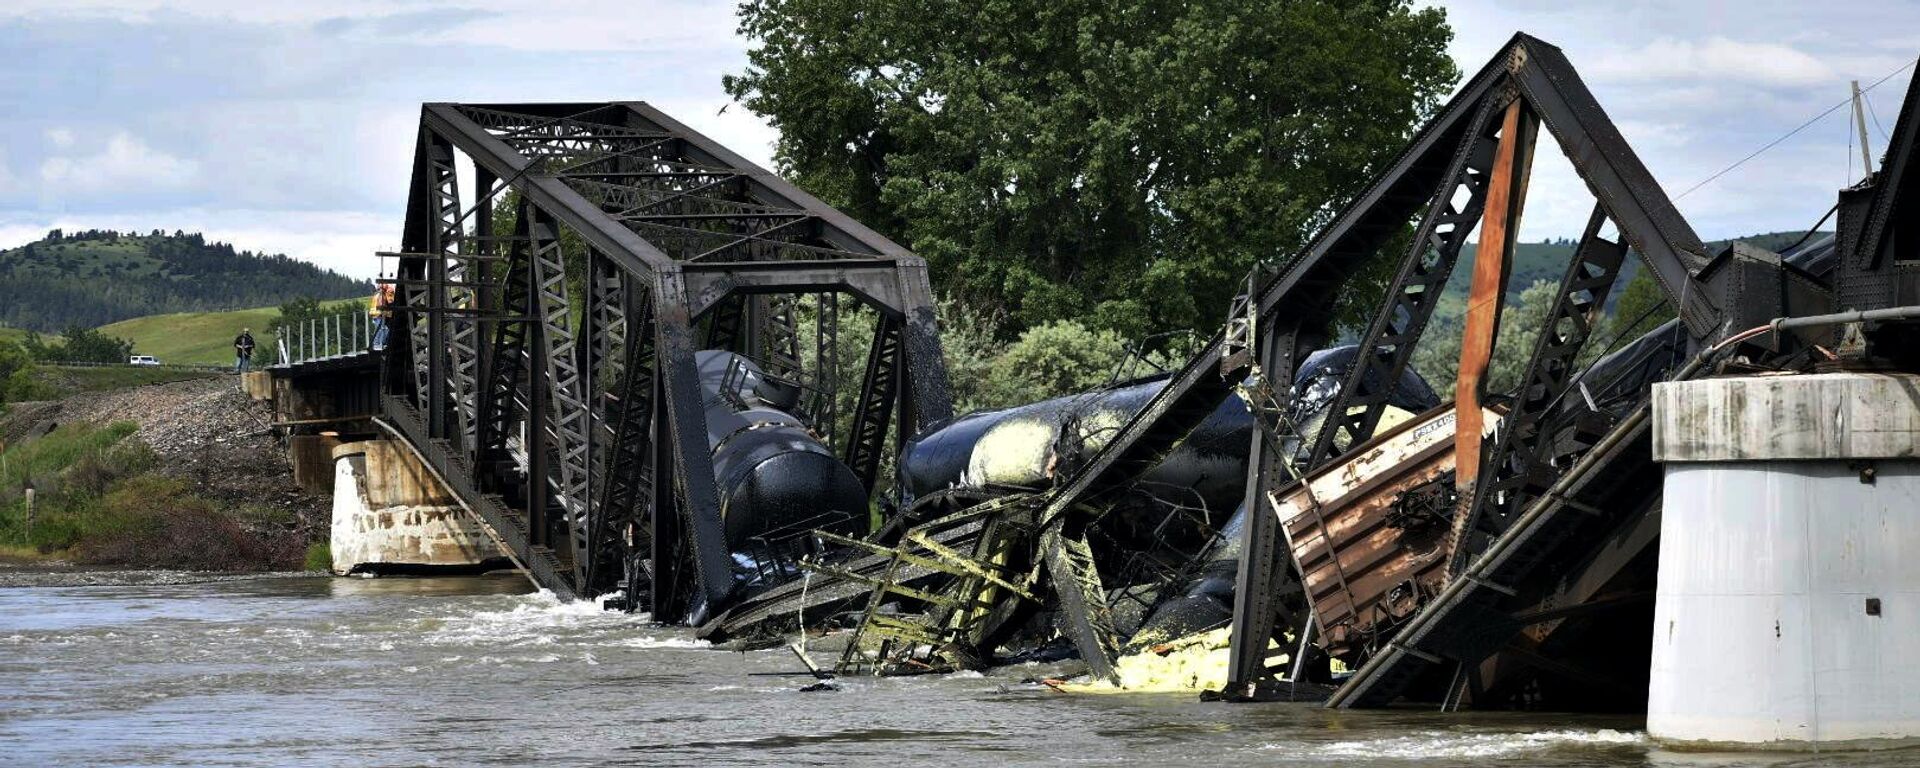 Several train cars are immersed in the Yellowstone River after a bridge collapse near Columbus, Mont., on Saturday, June 24, 2023. The bridge collapsed overnight, causing a train that was traveling over it to plunge into the water below.  - Sputnik International, 1920, 27.06.2023